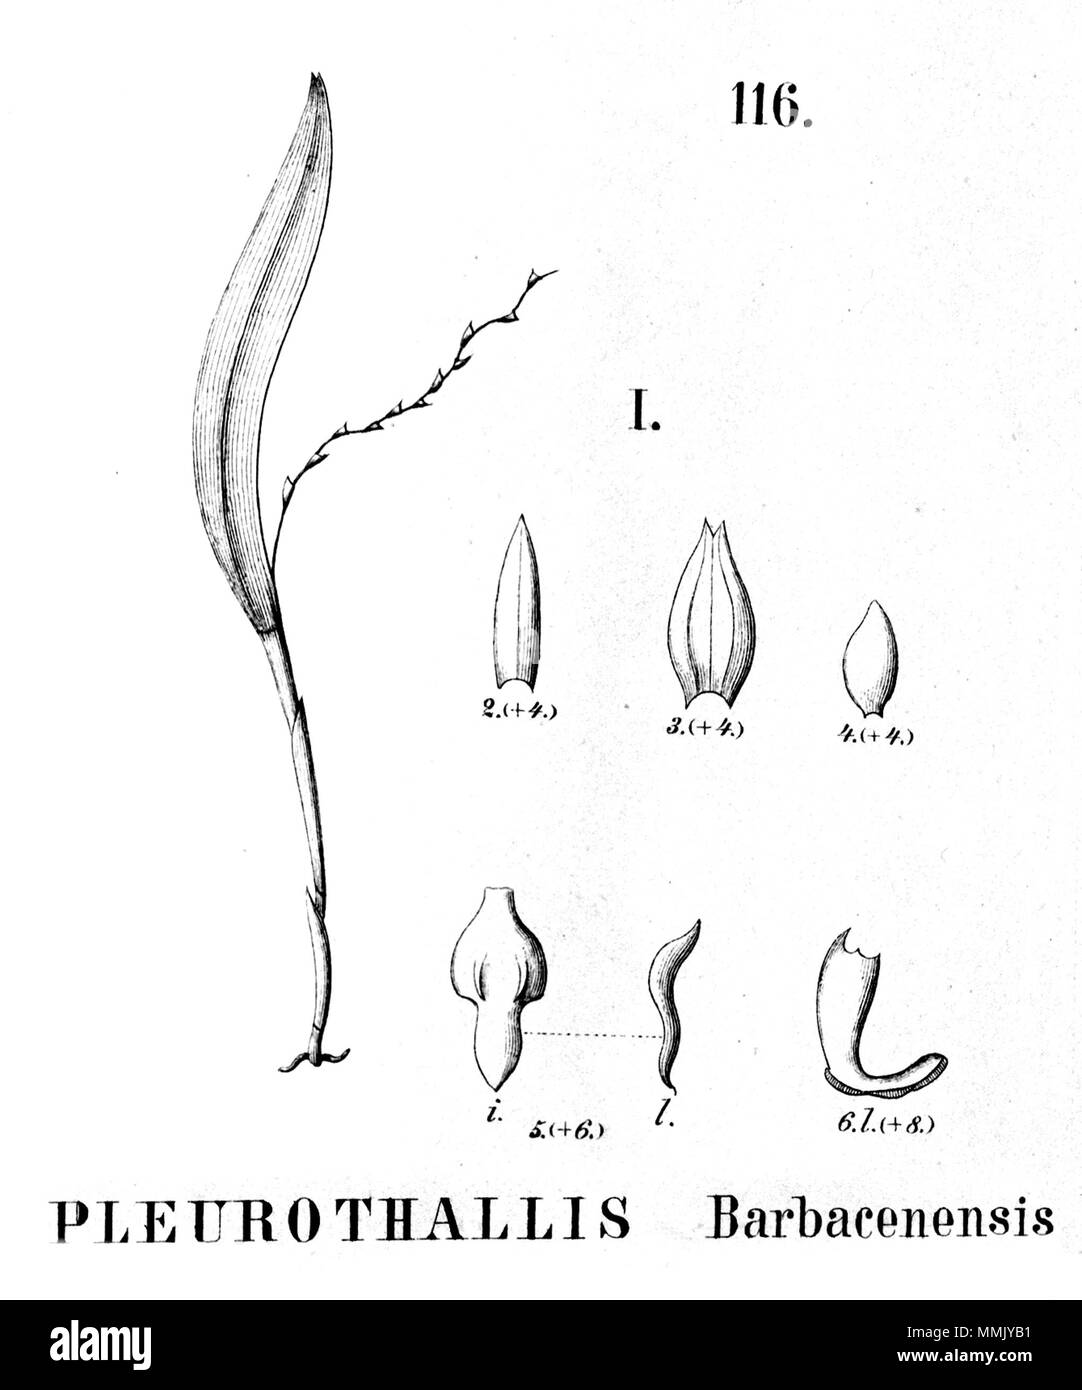 . Illustration of Acianthera hygrophila (as syn. Pleurothallis barbacenensis)  . between 1893 and 1896. Alfred Cogniaux (1841 - 1916) 25 Acianthera hygrophila (as Pleurothallis barbacenensis - cut from Fl.Br.3-4-116 - fig. I Stock Photo